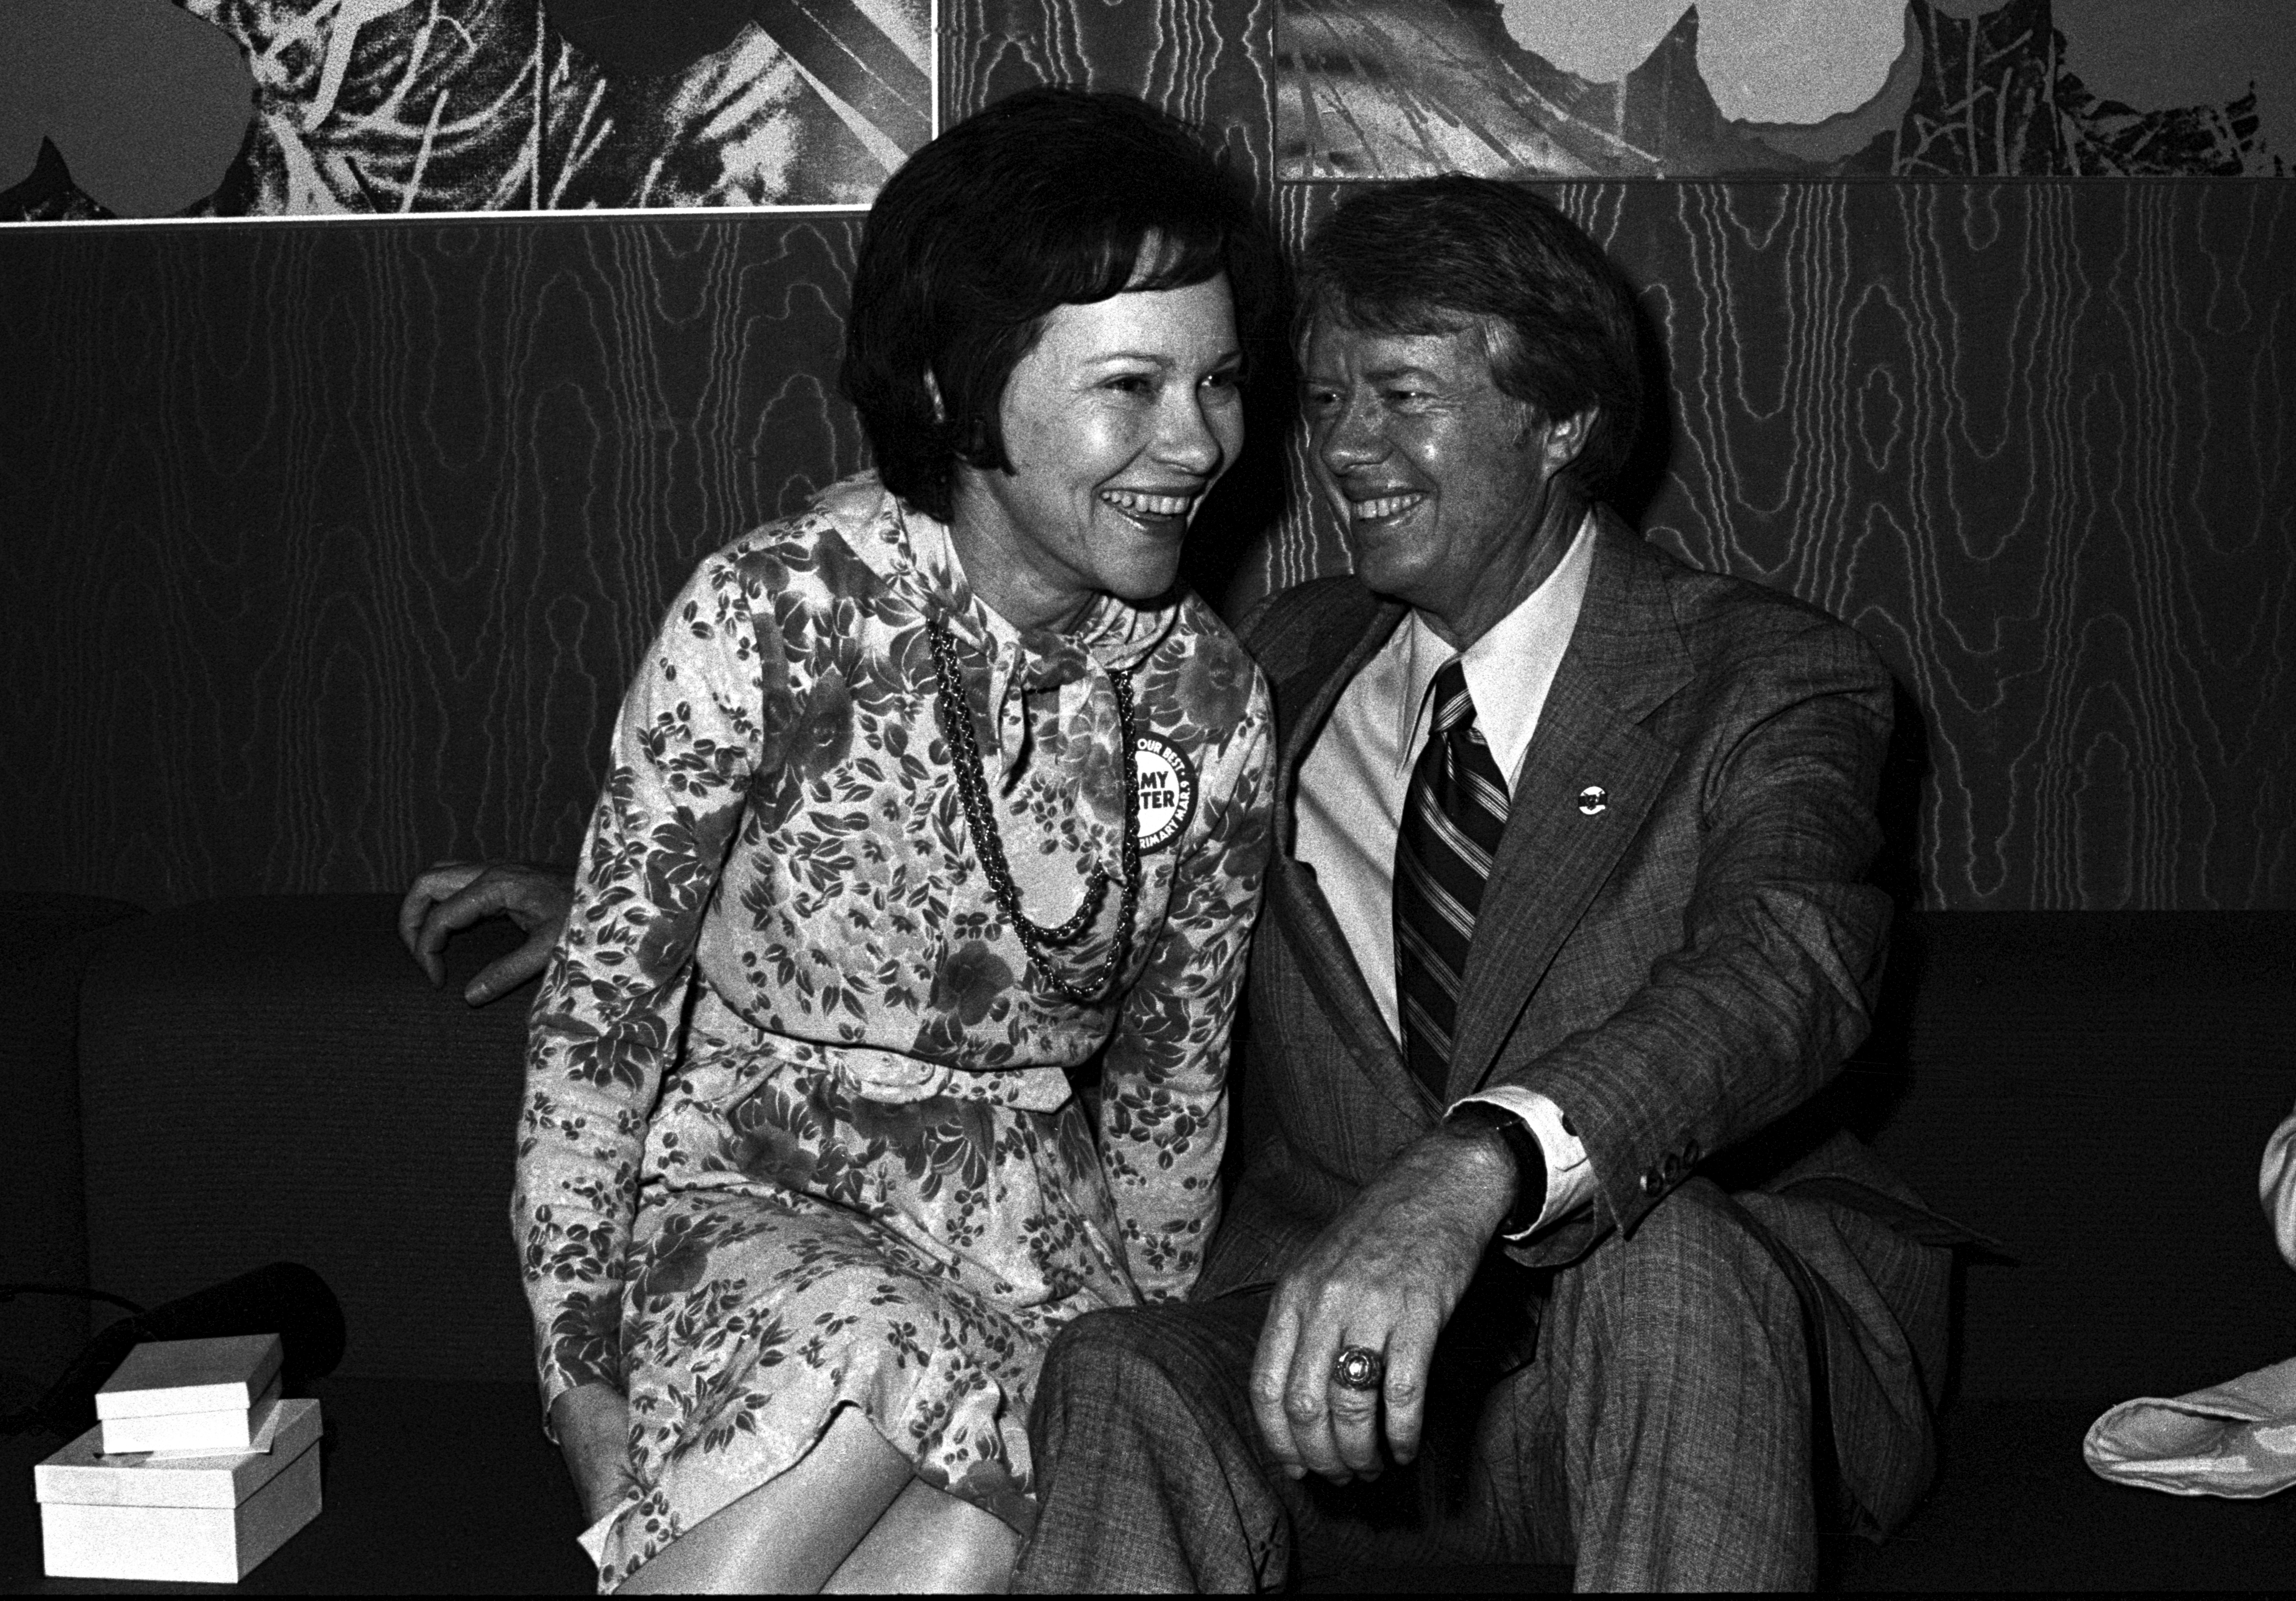 Jimmy and  Rosalynn Carter at a fundraiser for his 1976 presidential run in Atlanta, Georgia, on February 14, 1976 | Source: Getty Images